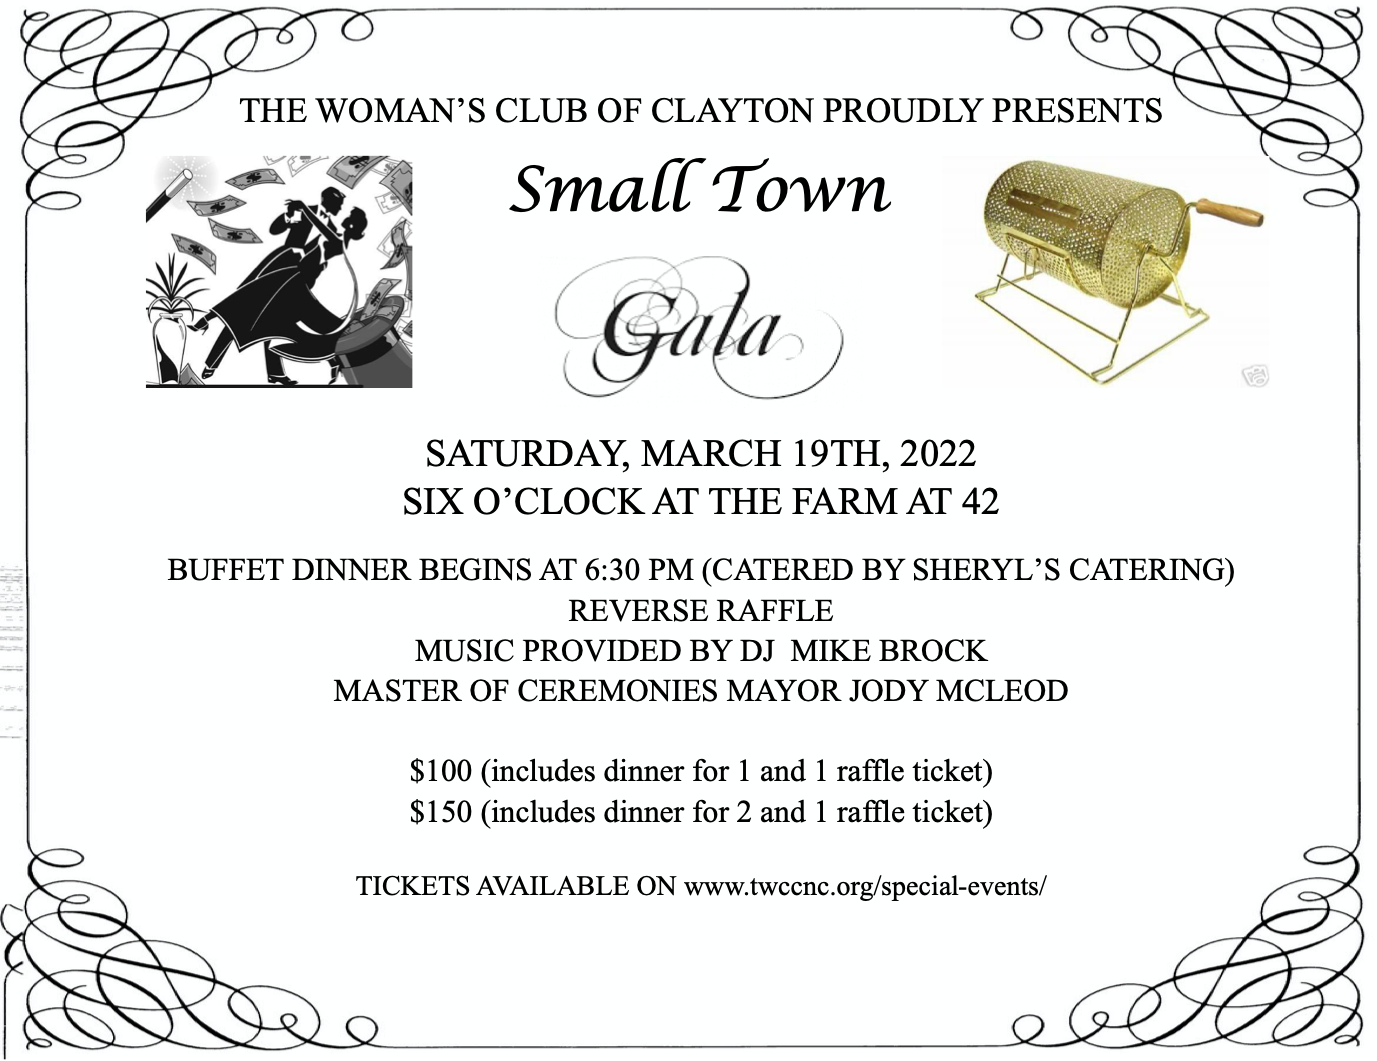 The Woman’s Club of Clayton Small Town Gala